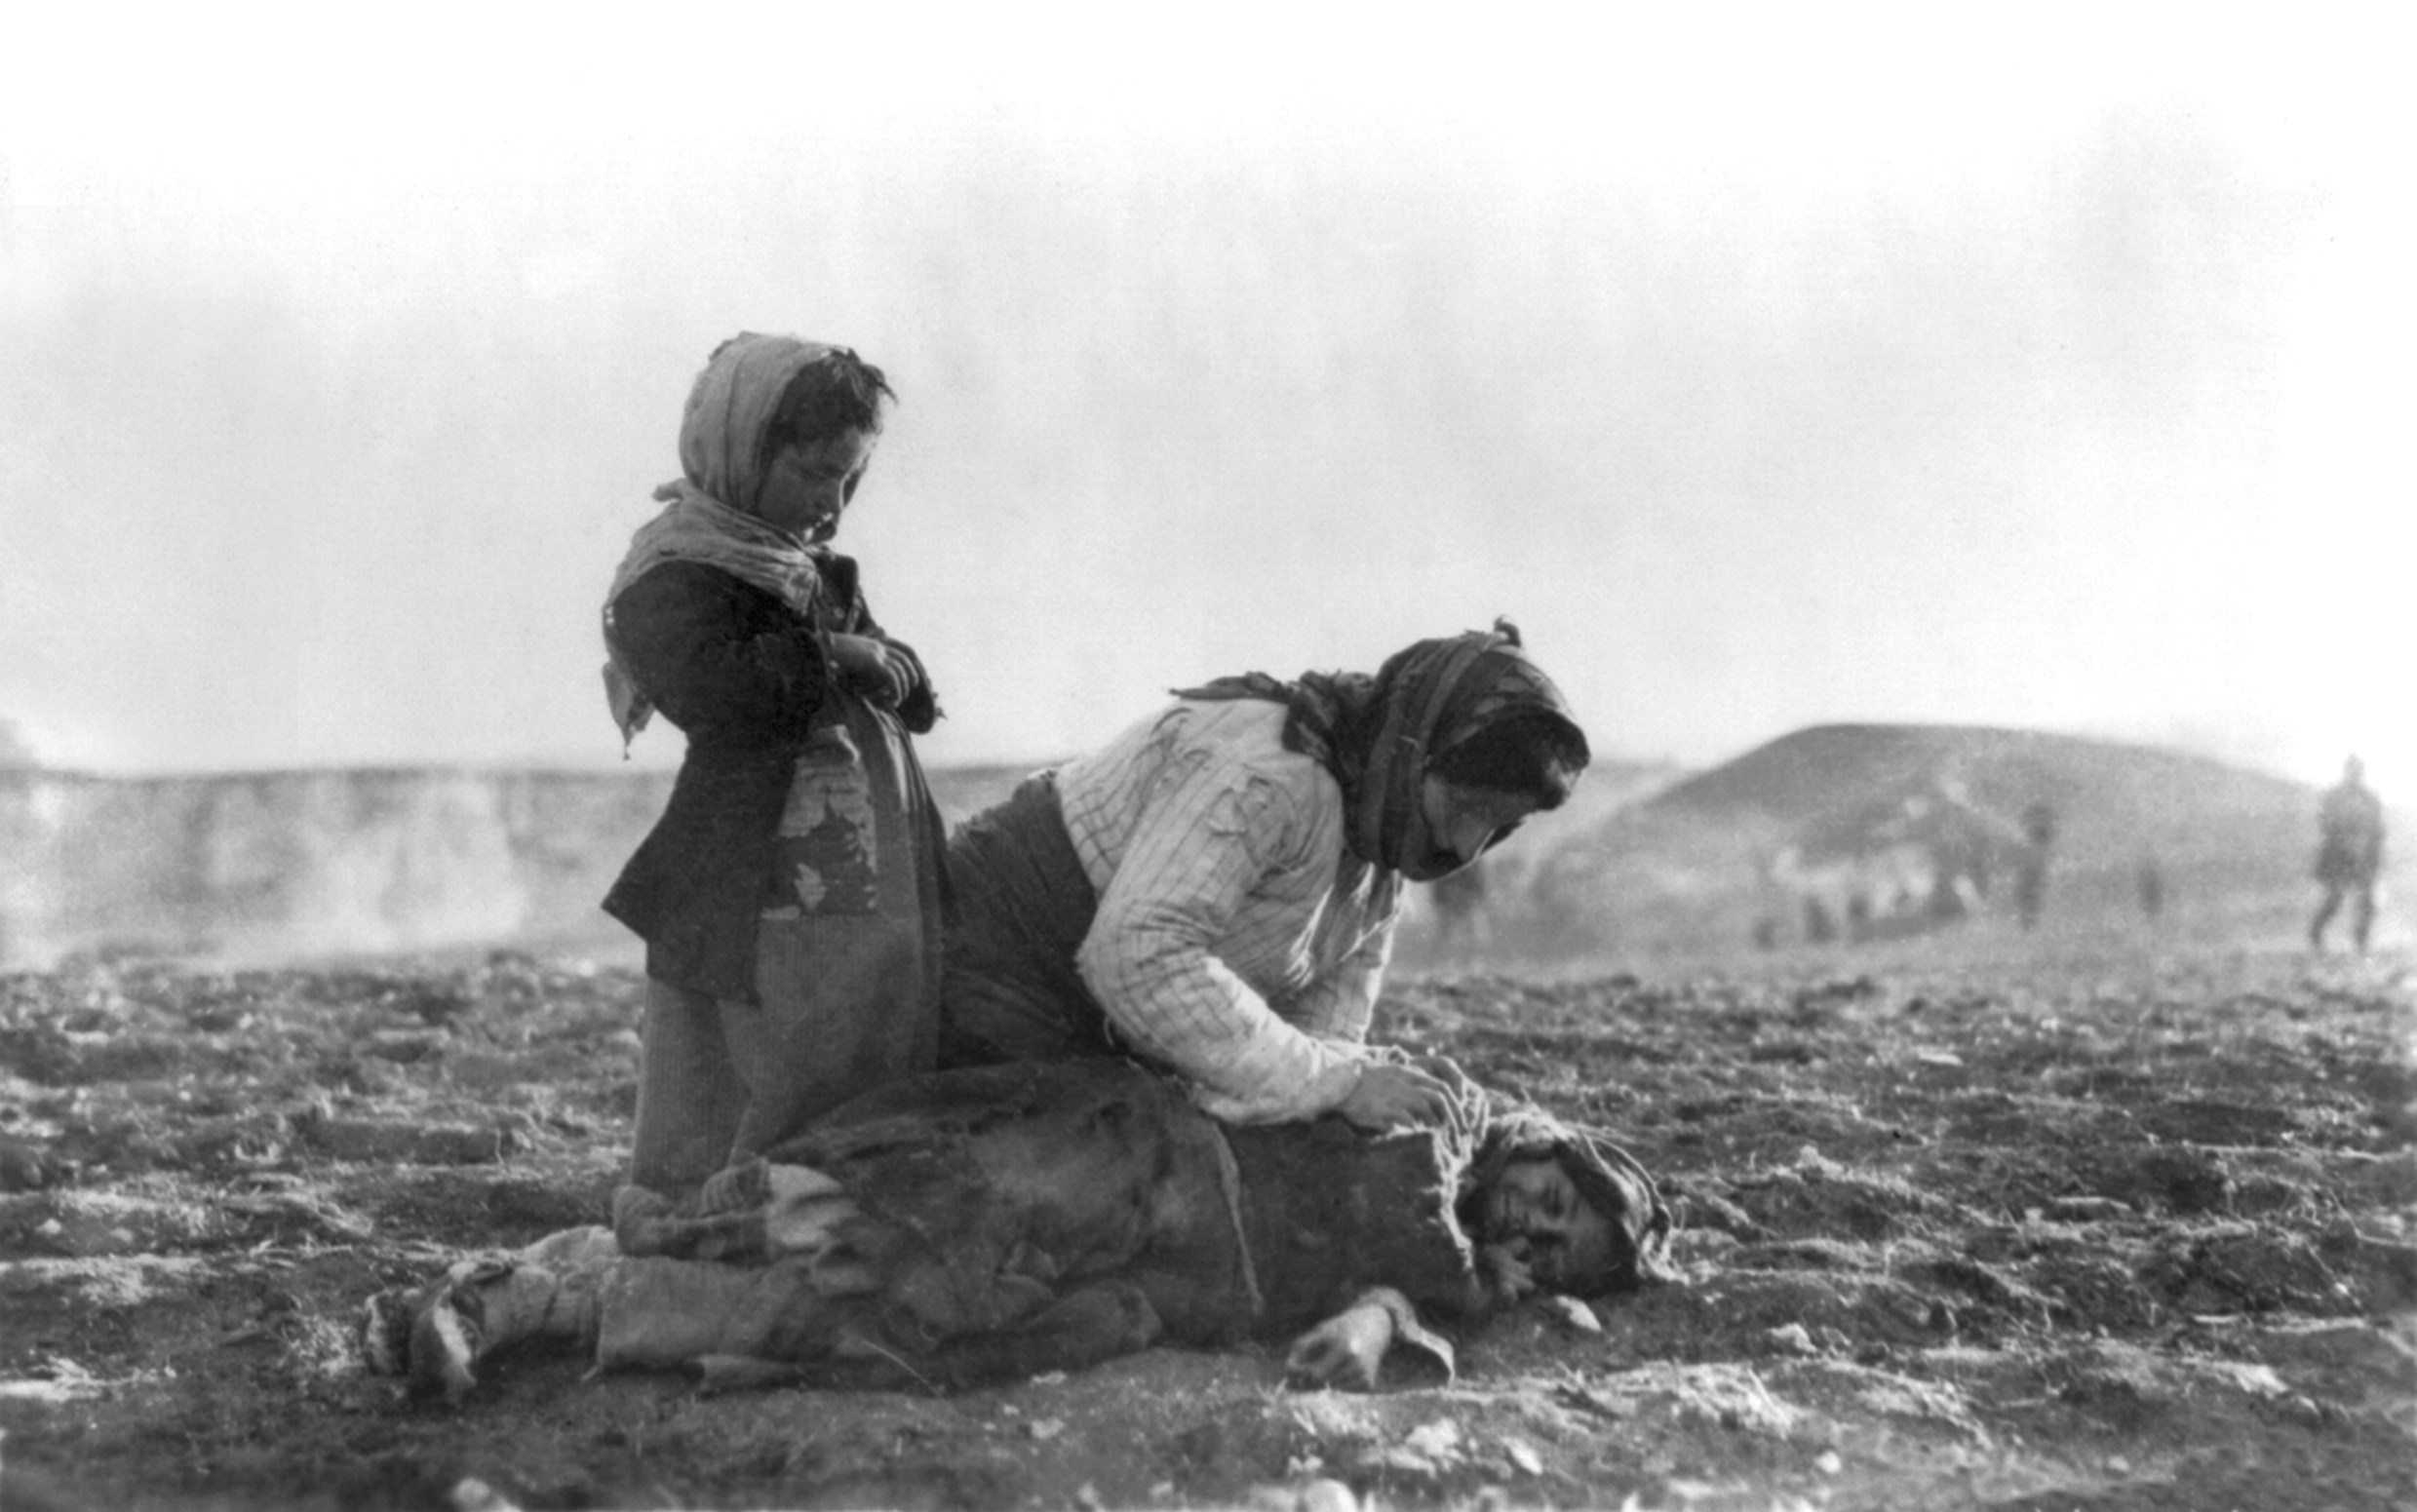 PICTURED: An Armenian child dead in the fields within sight of help and safety at Aleppo.